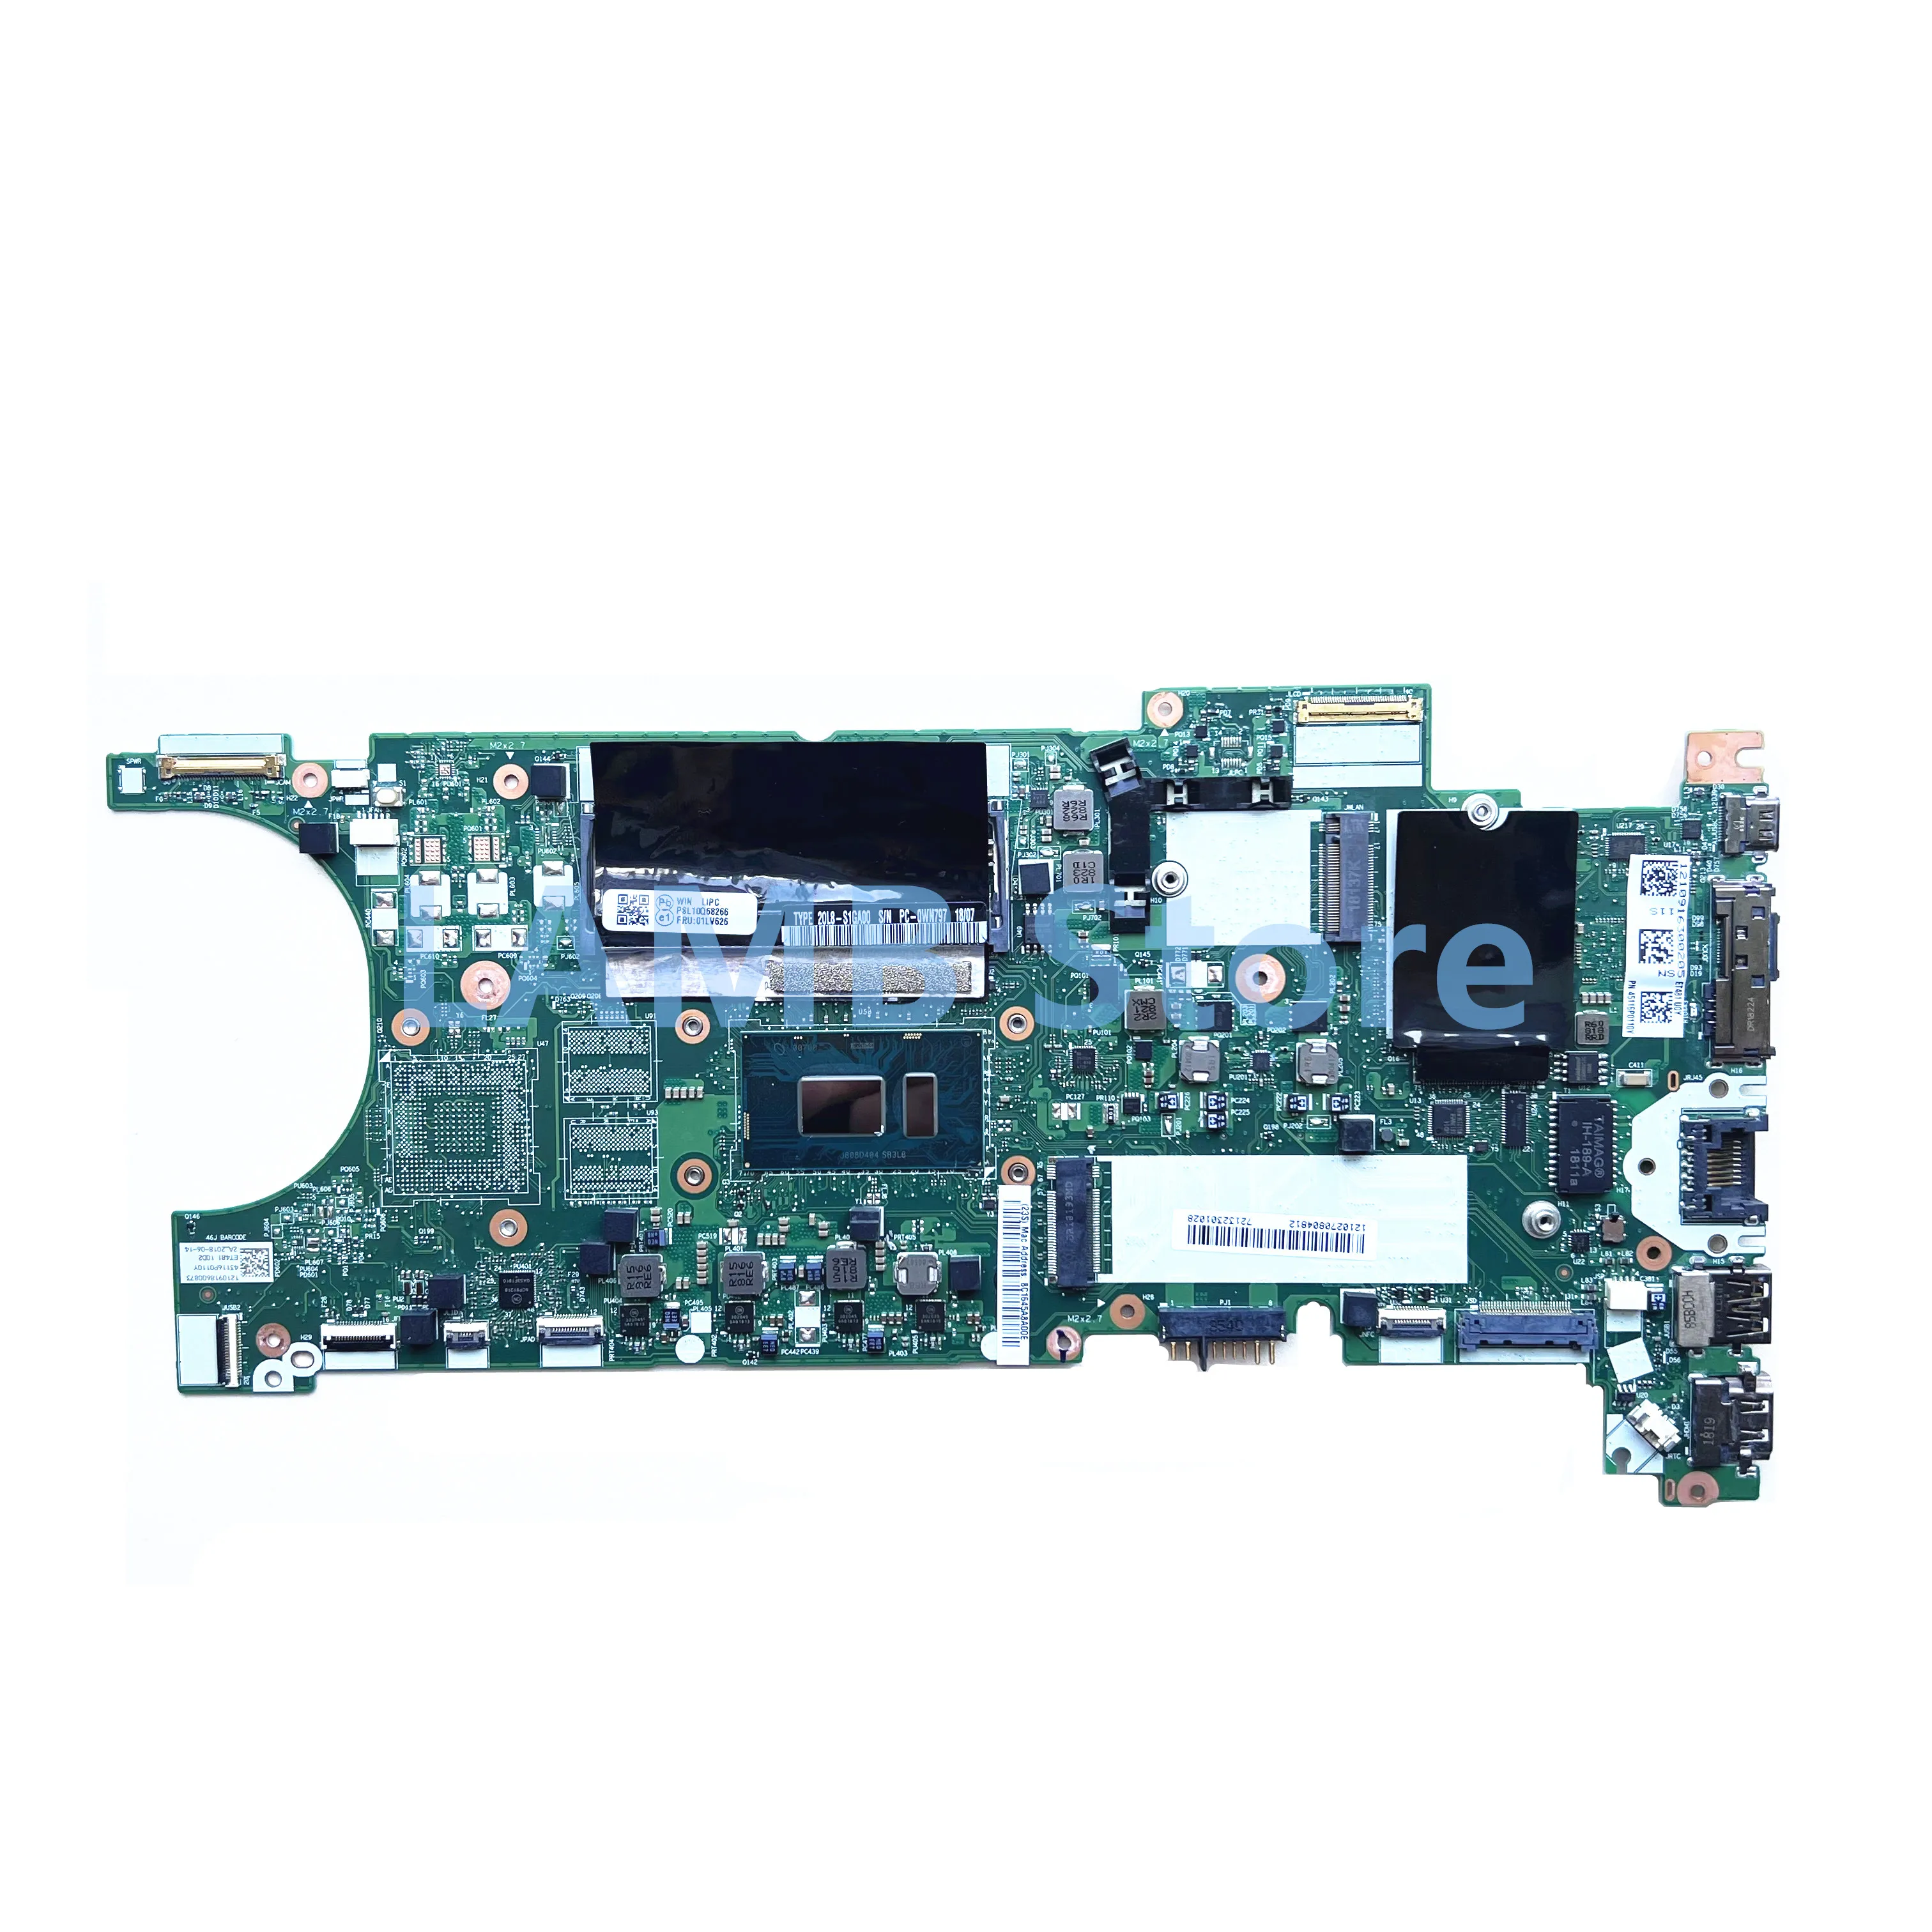 For Lenovo Thinkpad T480s Laptop Motherboard W/sr3l8 I7-8650u Cpu 8g Ram  Et481 Nm-b471 Fru 01lv626 01yu144 02hl854 100% Tested - Buy T480s  Motherboard,Et481 Nm-b471,01lv626 01yu144 02hl854 Product on 